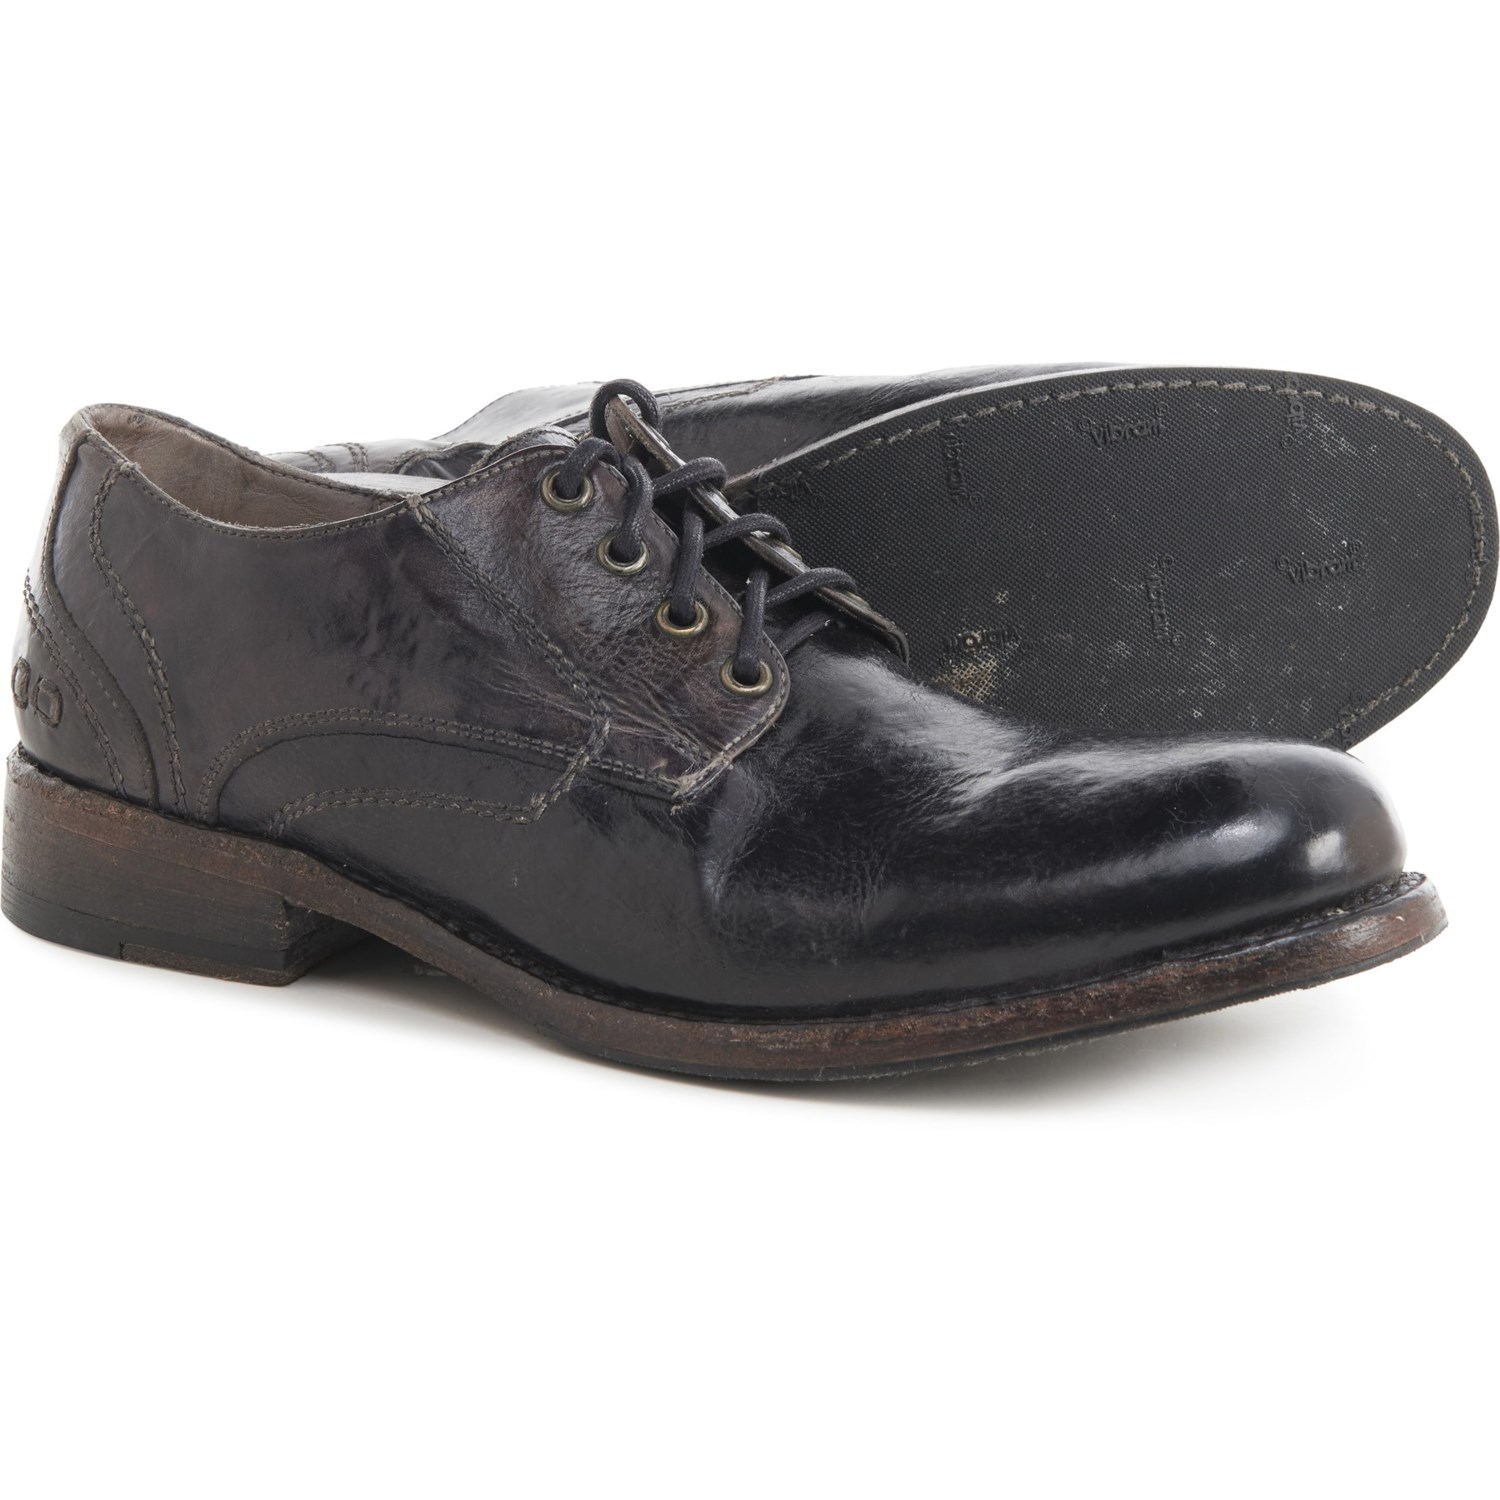 Bed Stu Galao Shoes - Leather (For Men)